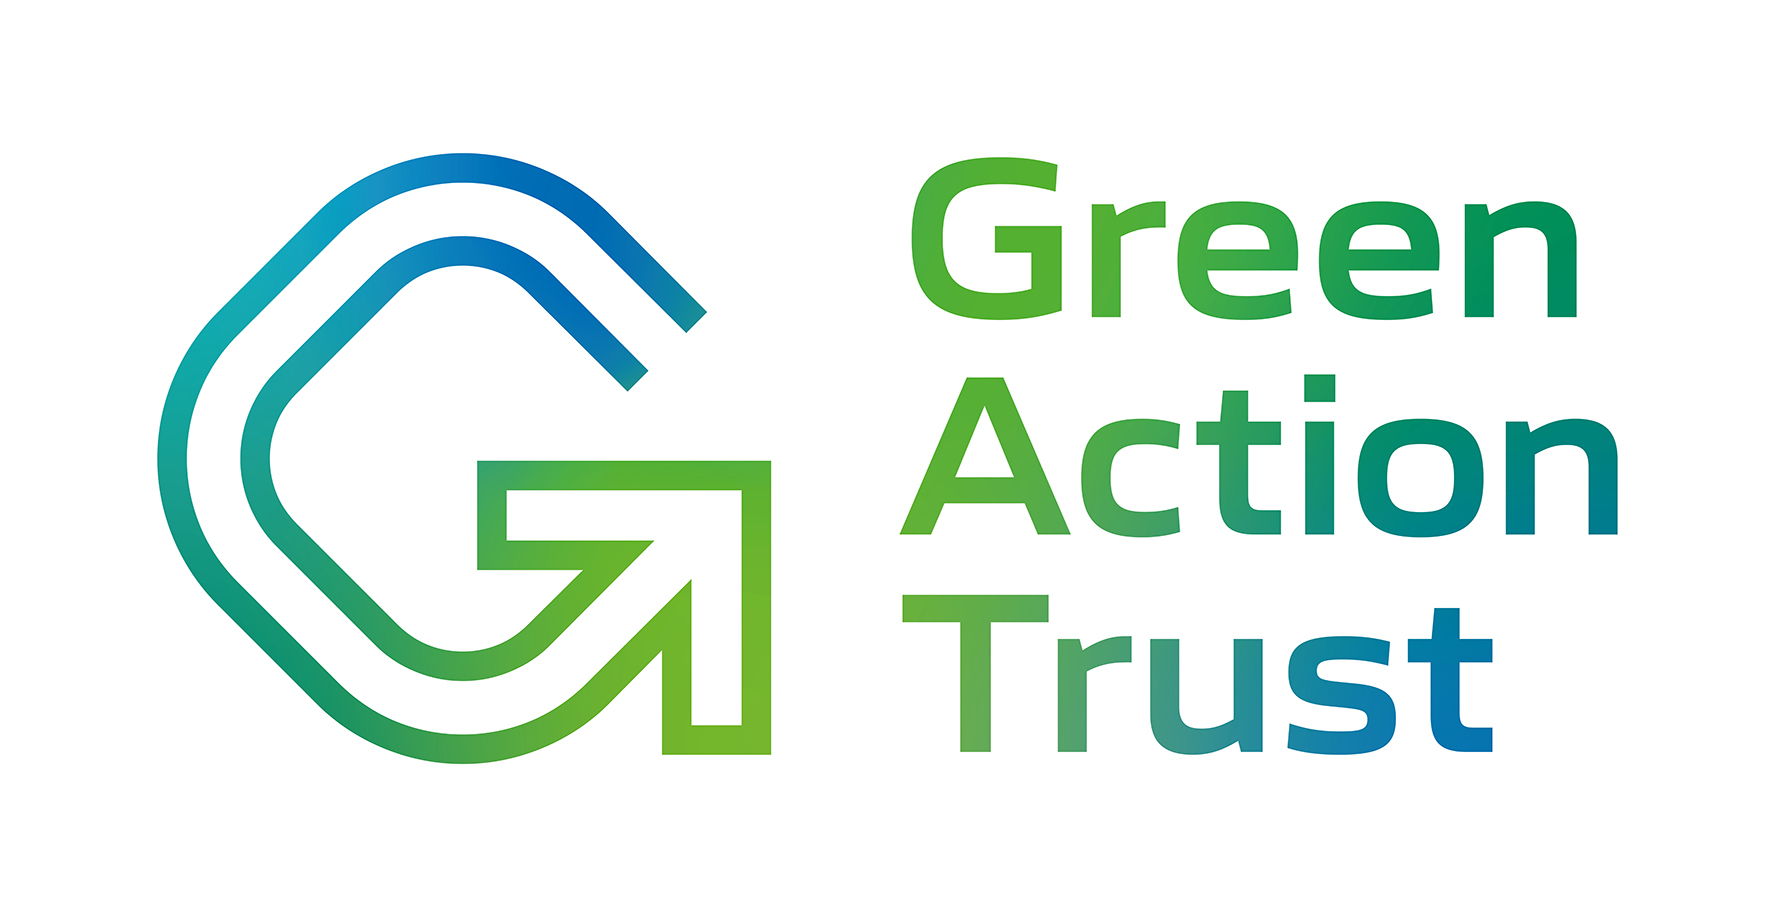 Green Action Trust: Land Reuse Month throws spotlight on redeveloping vacant sites